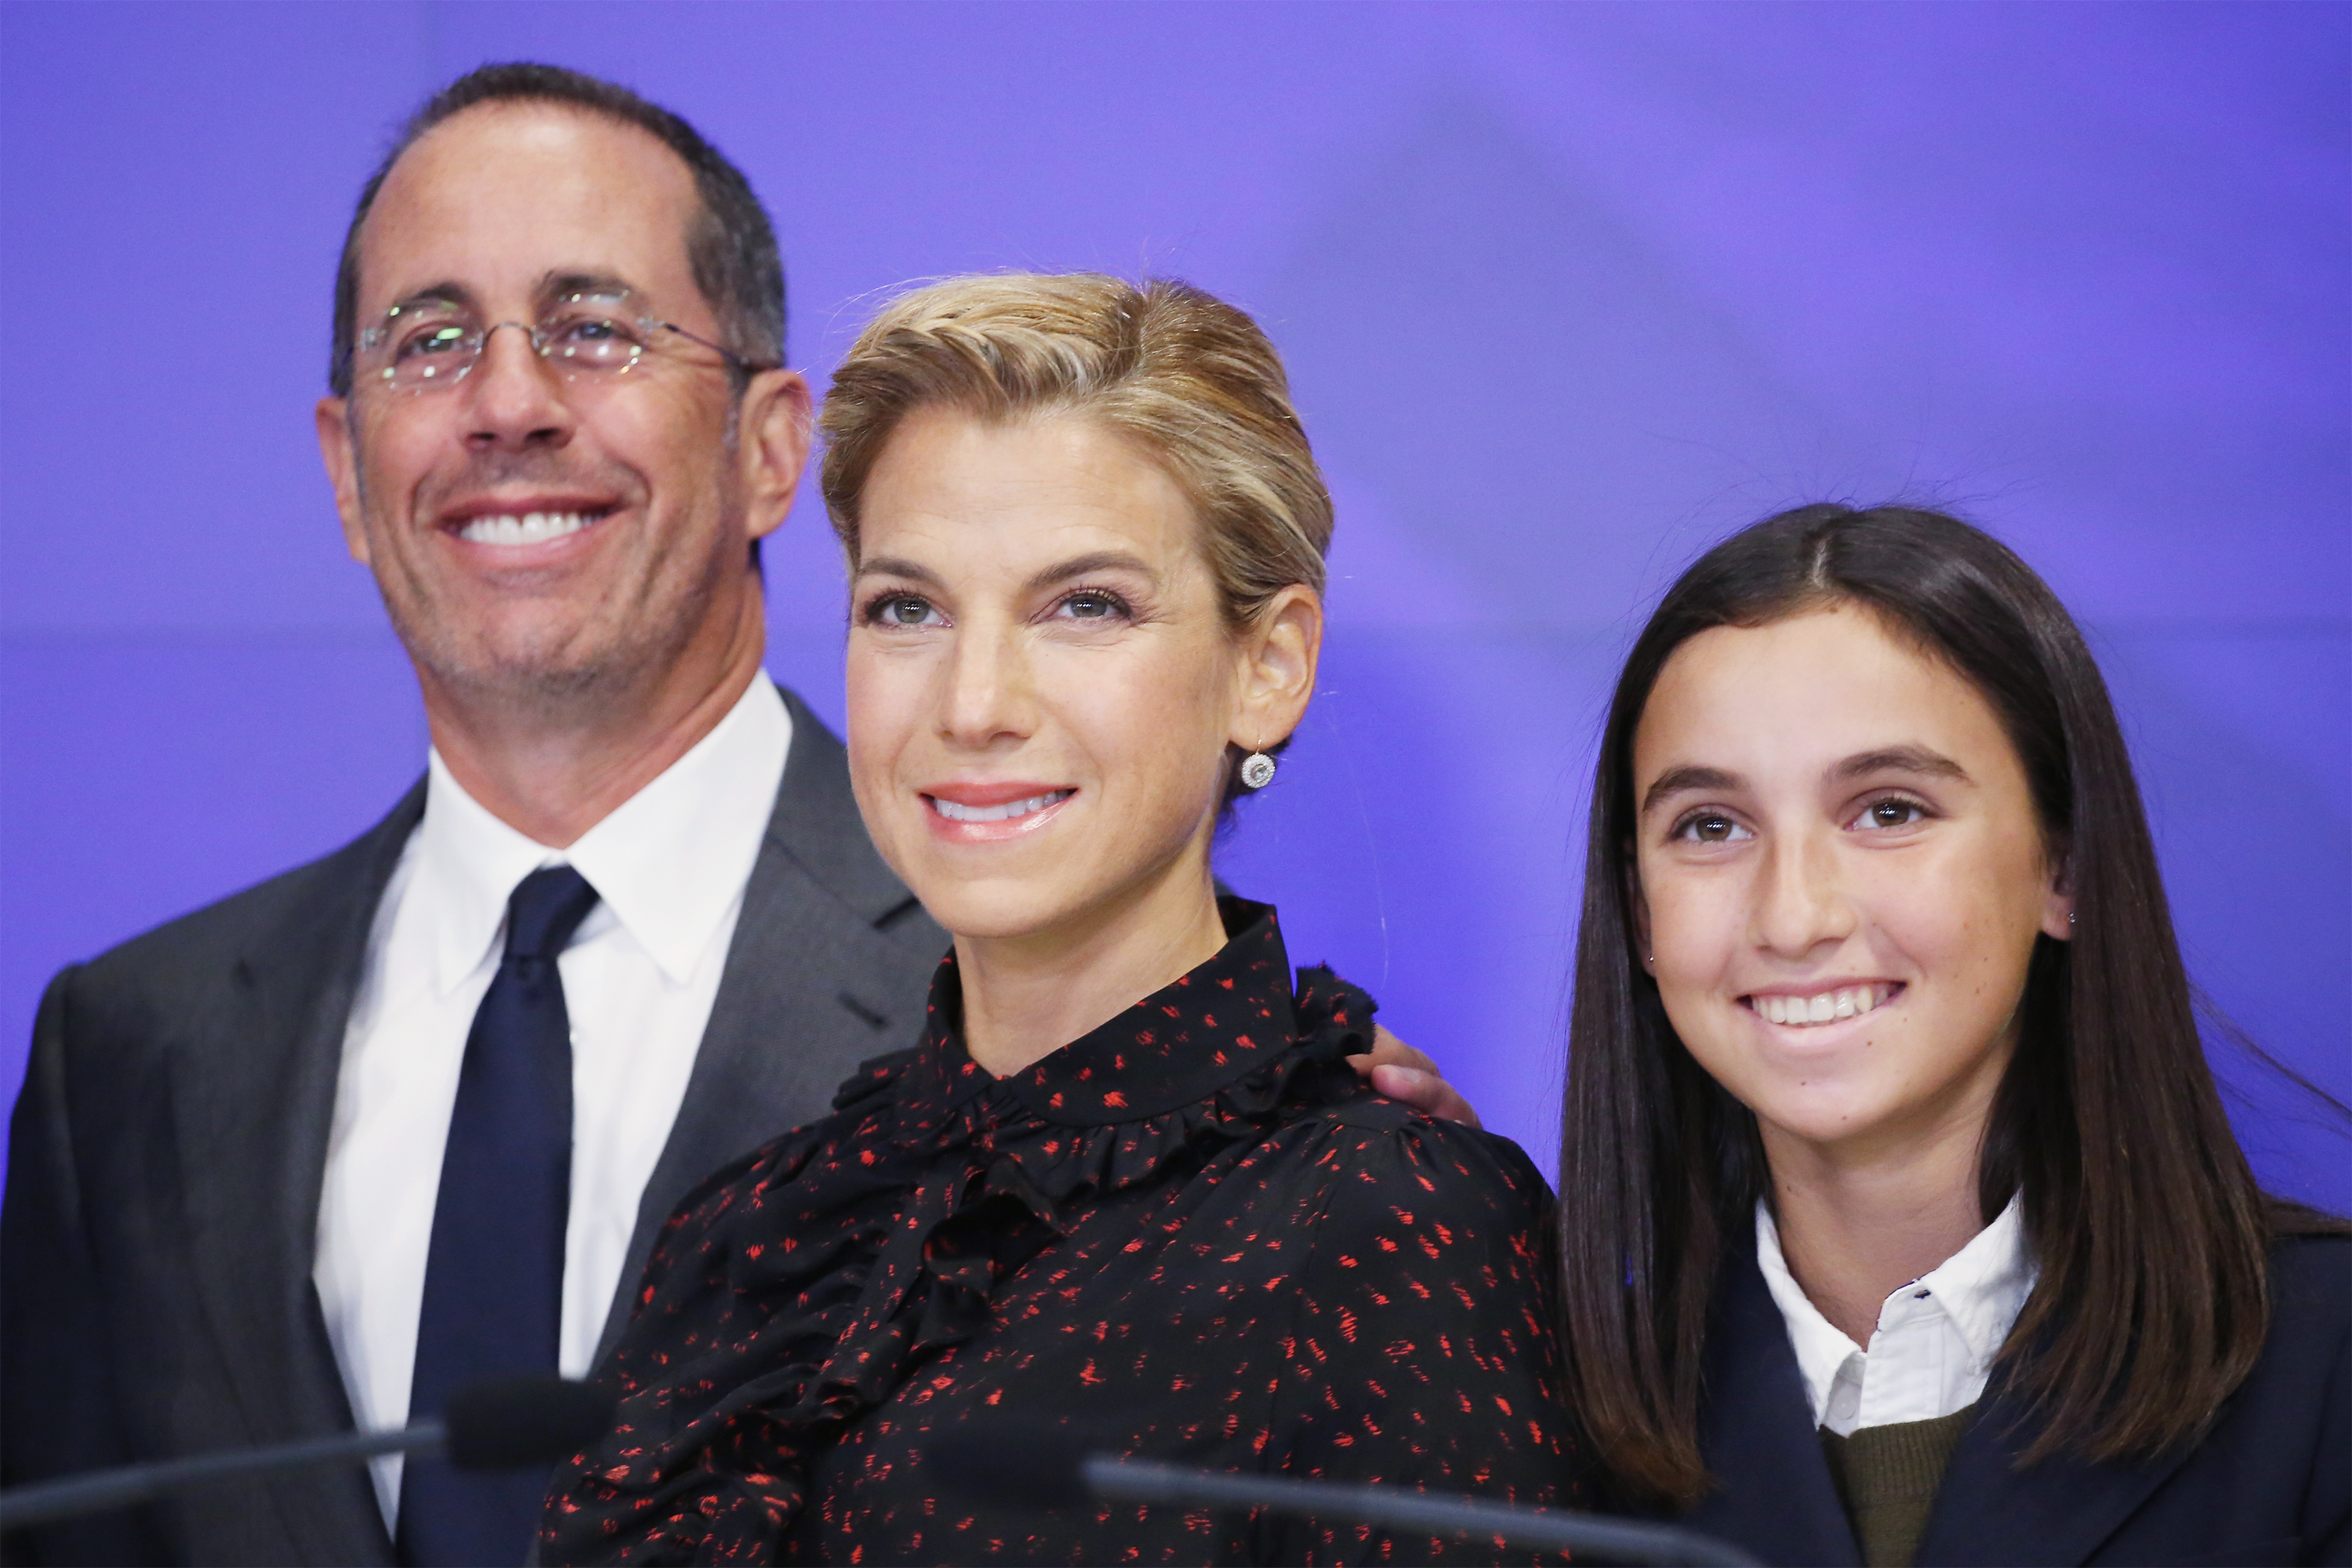 Jerry Seinfeld, his wife Jessica Seinfeld and their daughter Sascha Seinfeld ringing the opening bell at NASDAQ on April 14, 2016, in New York City. | Source: Getty Images